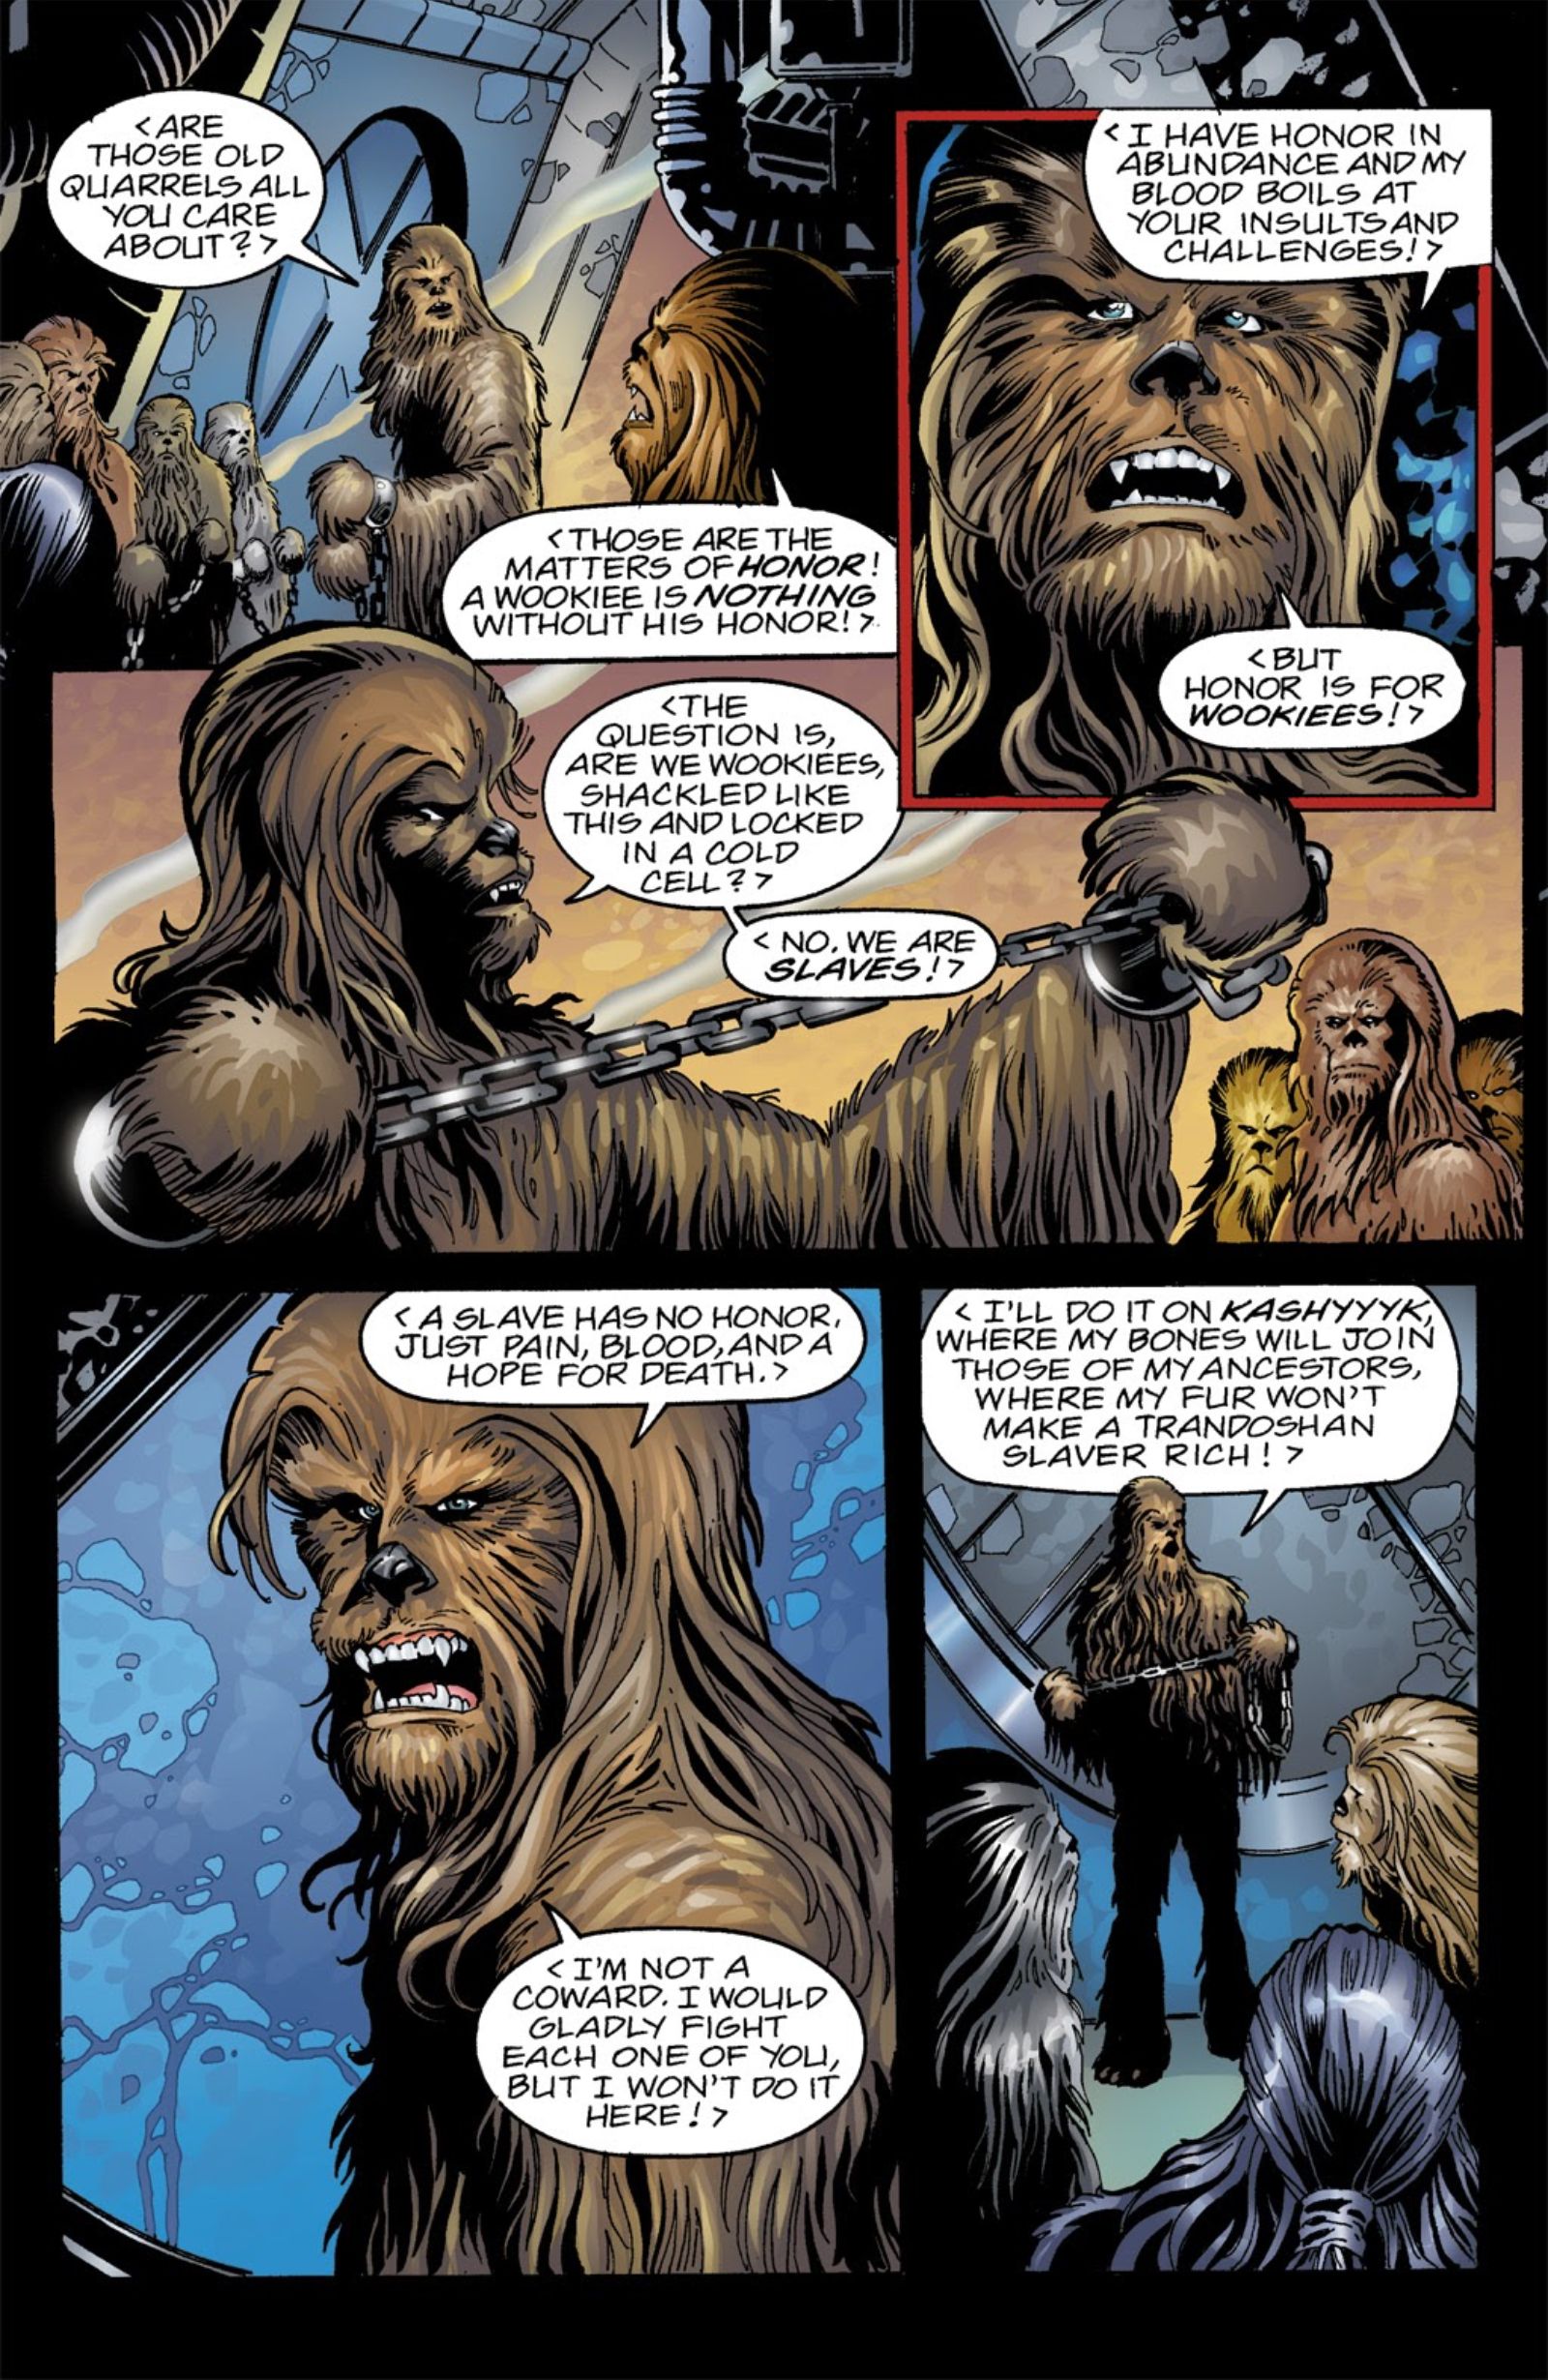 Chewbacca inspires Wookiees that they have something to fight for.